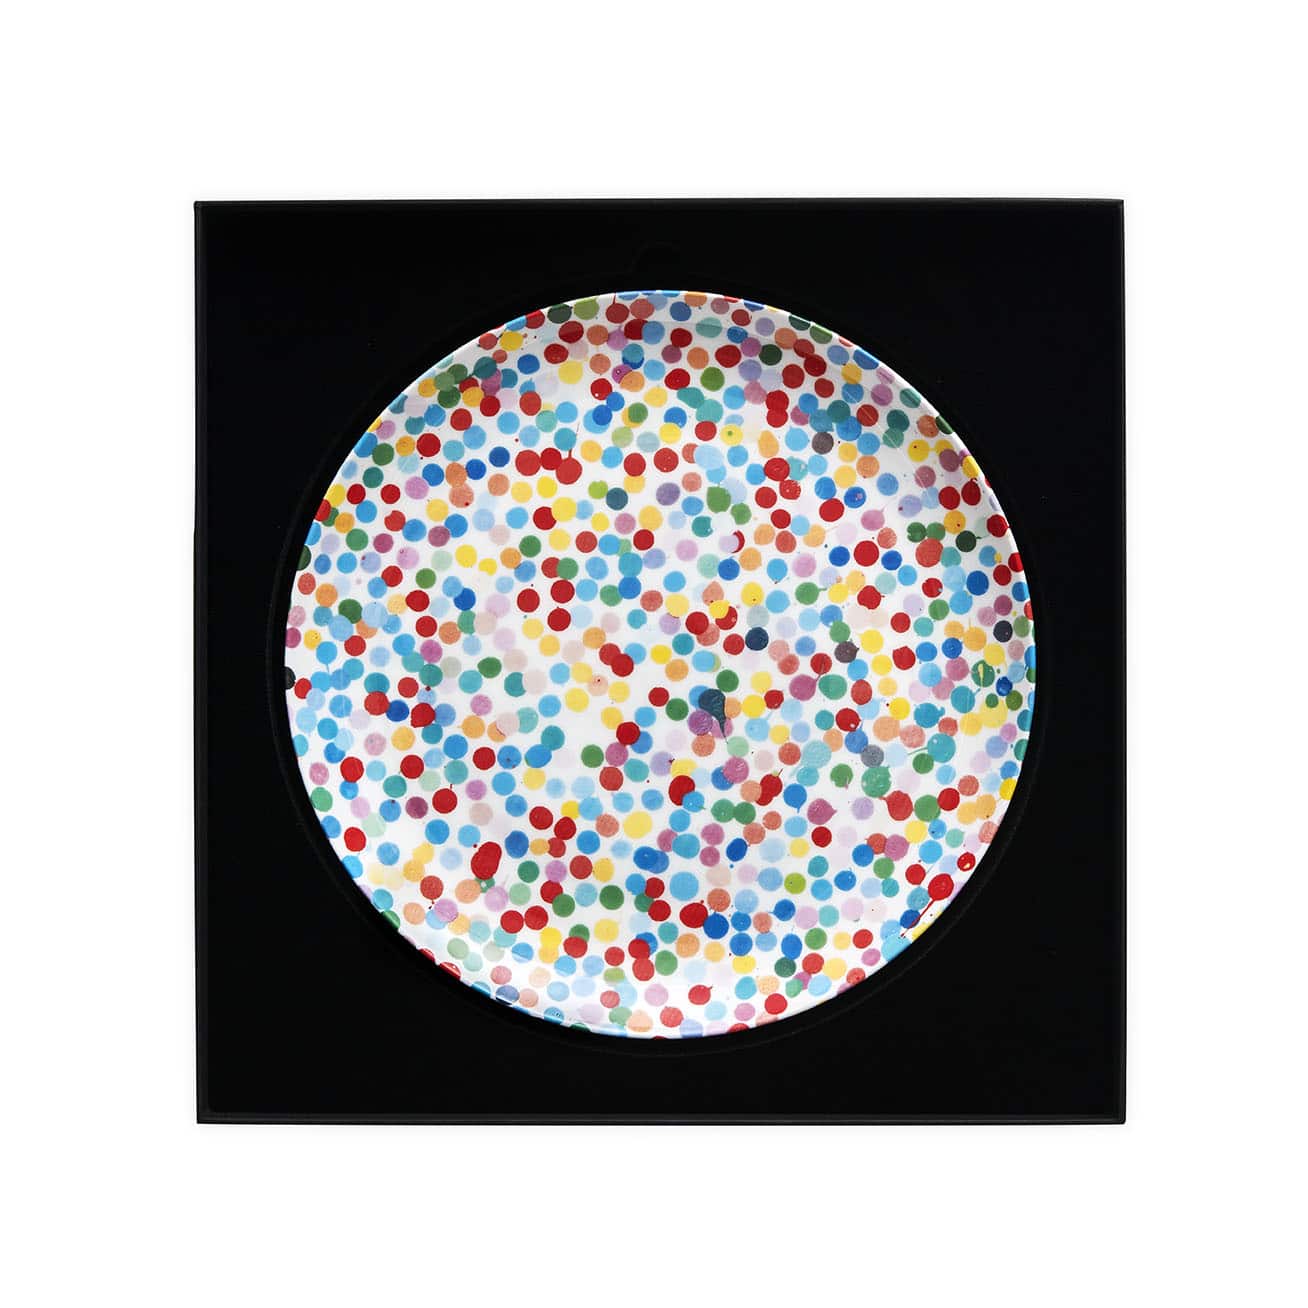 Set of 3 Damien Hirst - All Over Dot Plate - screen–printed with a vibrant Currency Dot design - SAVE from 20%